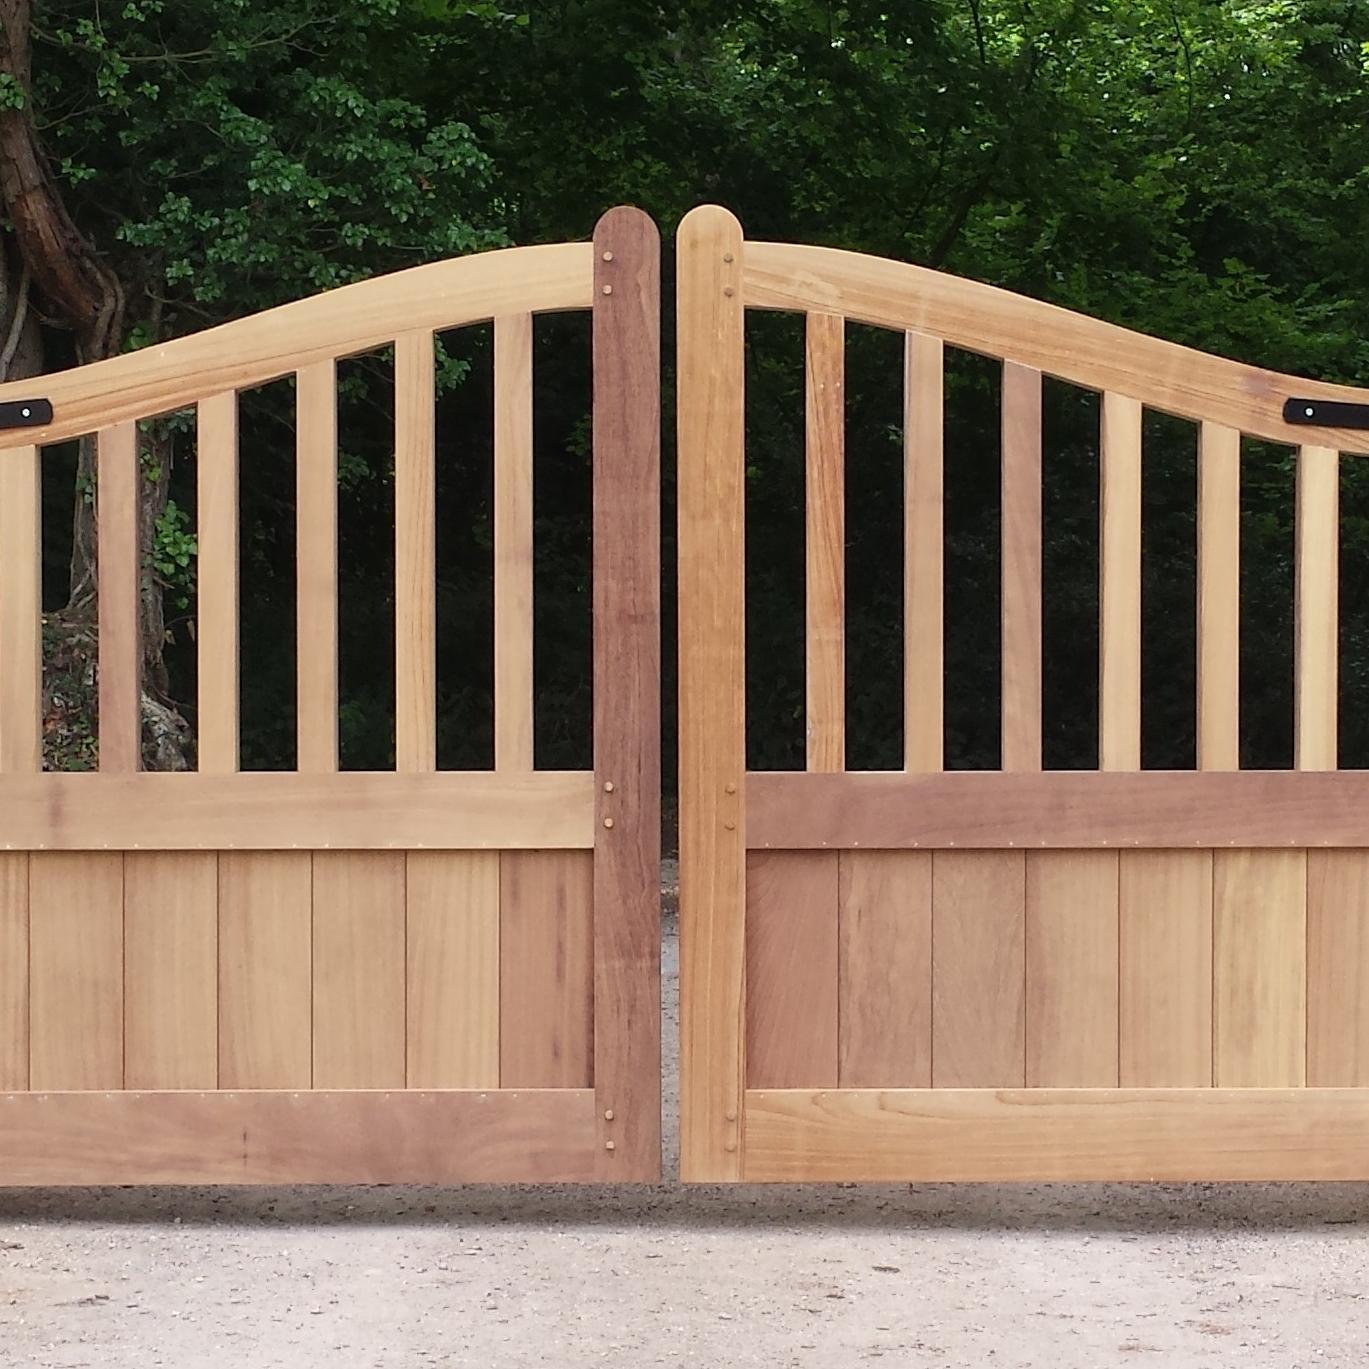 Friendly suppliers of fencing ,gates & sweet chestnut products. Great at gate automation too. Still making chestnut paling fencing by hand #Haslemere. Est 1946.